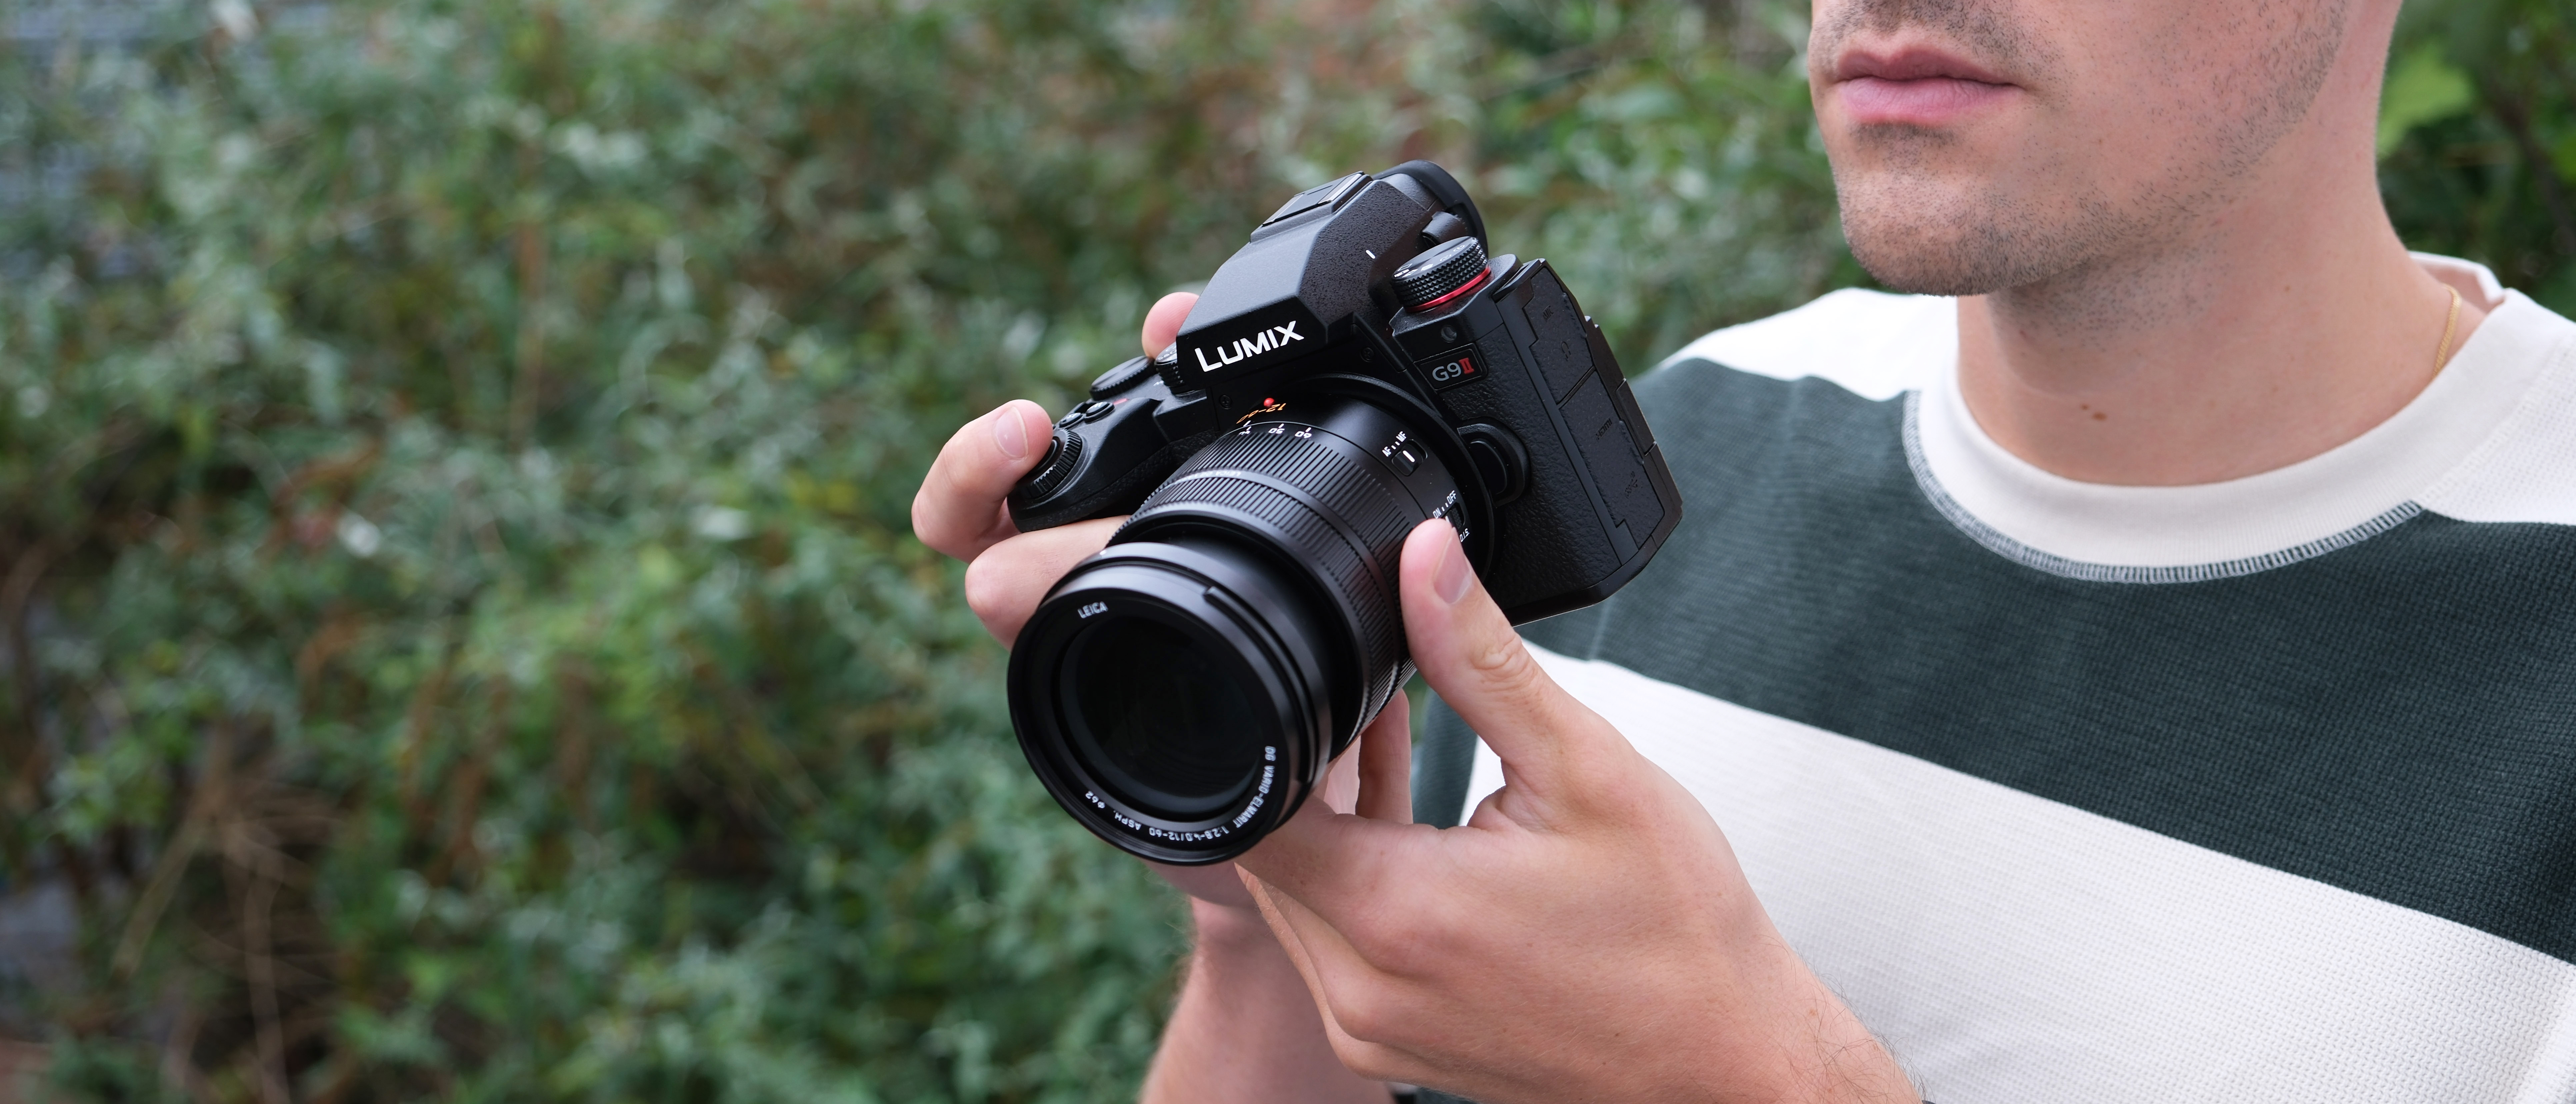 The Panasonic G9 II brings Phase-Detect Autofocus comes to Micro Four Thirds